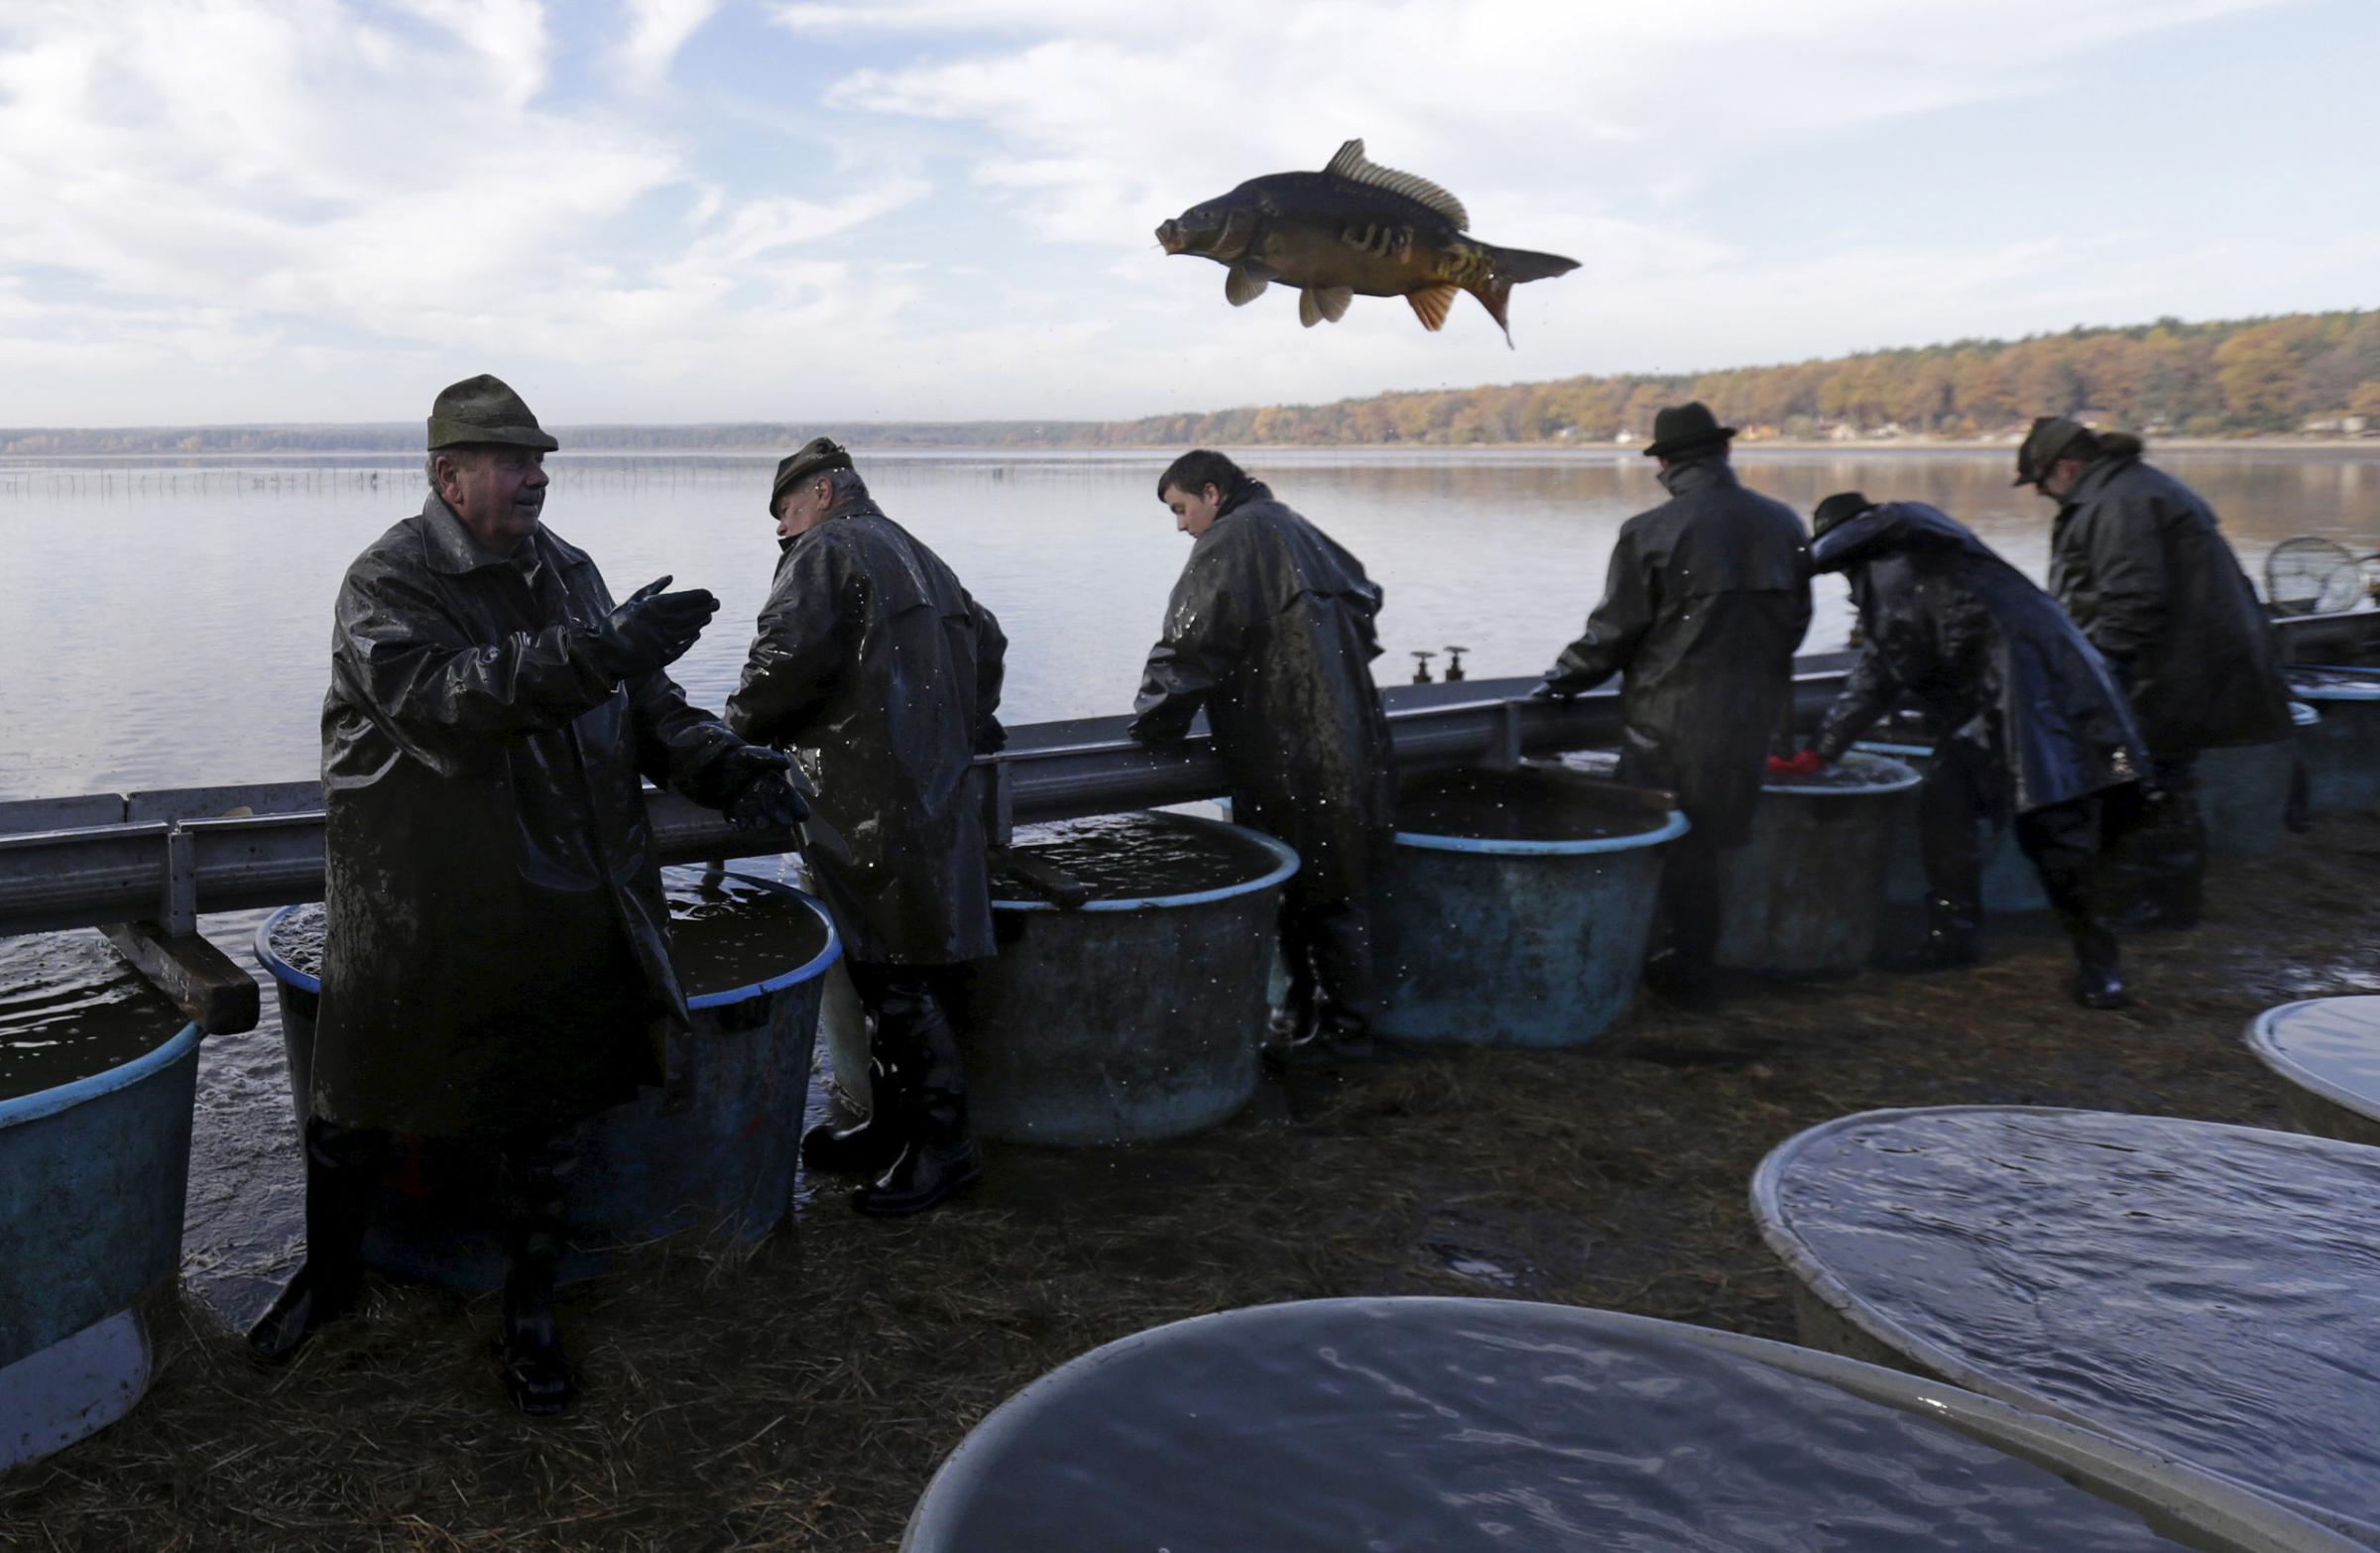 A fisherman throws a fish during the traditional carp haul in the village of Smrzov